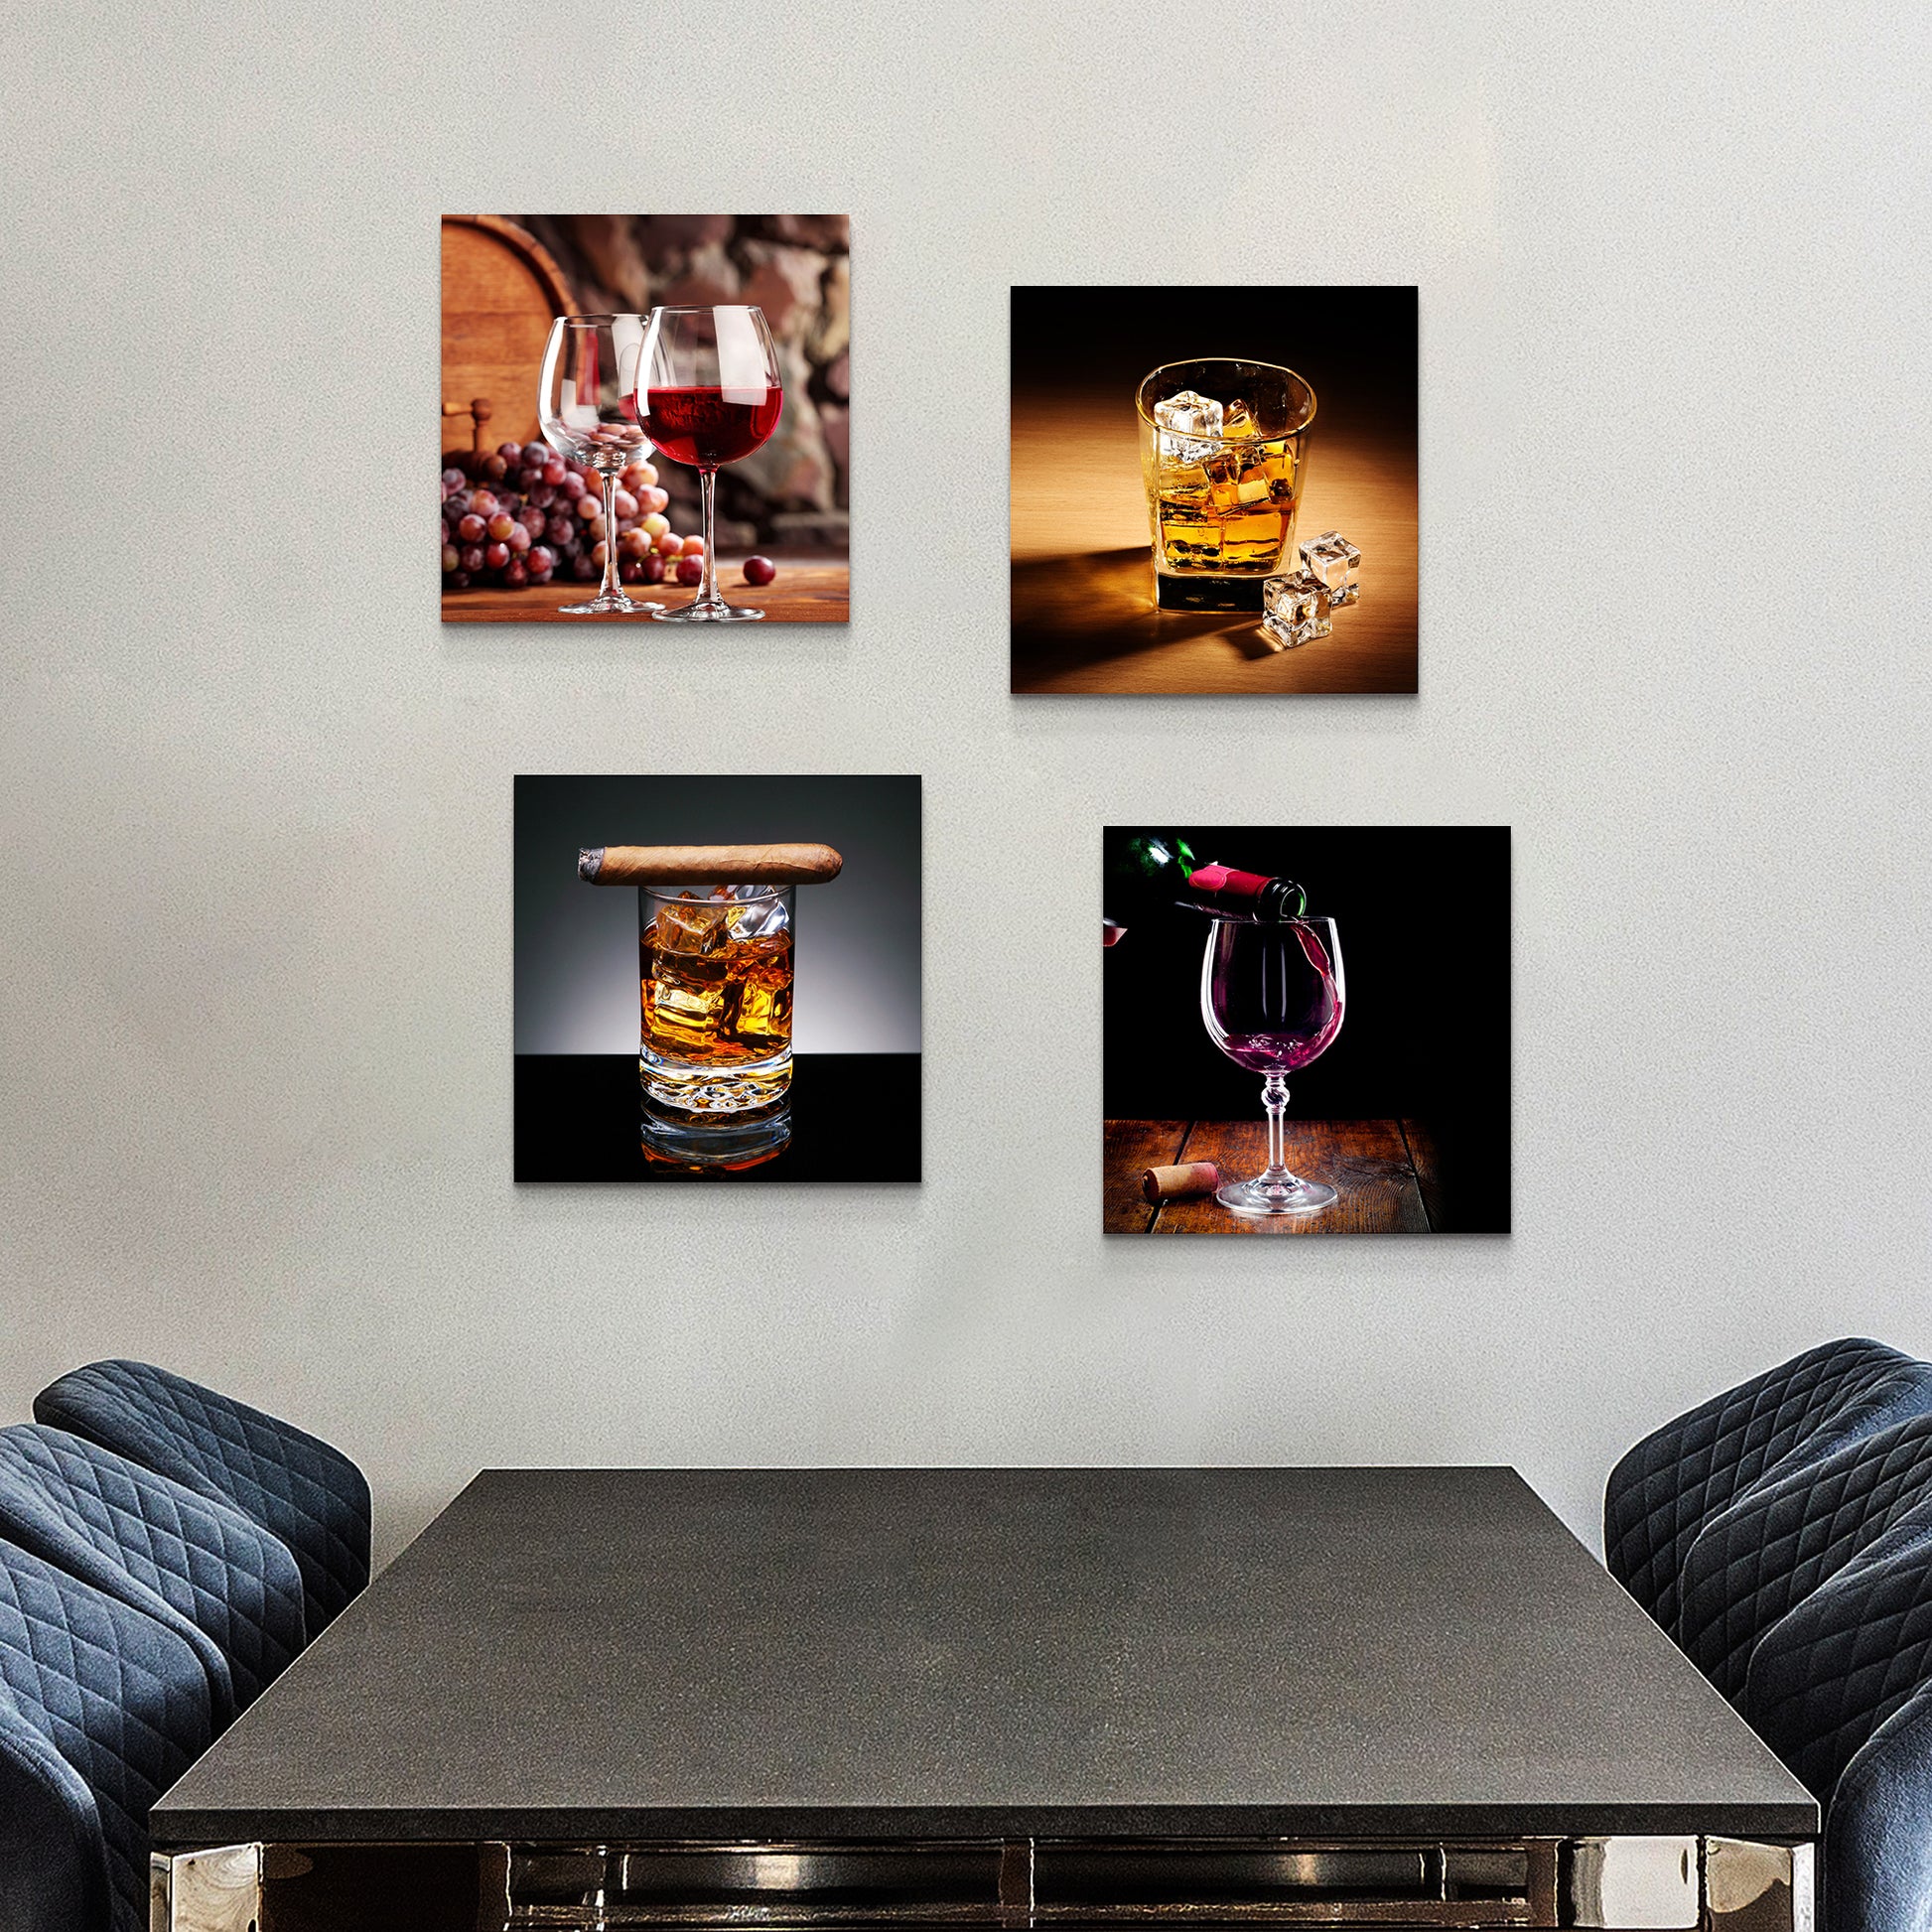 Pouring Wine Glass Wall Art 24x24 - Expo Home Decor